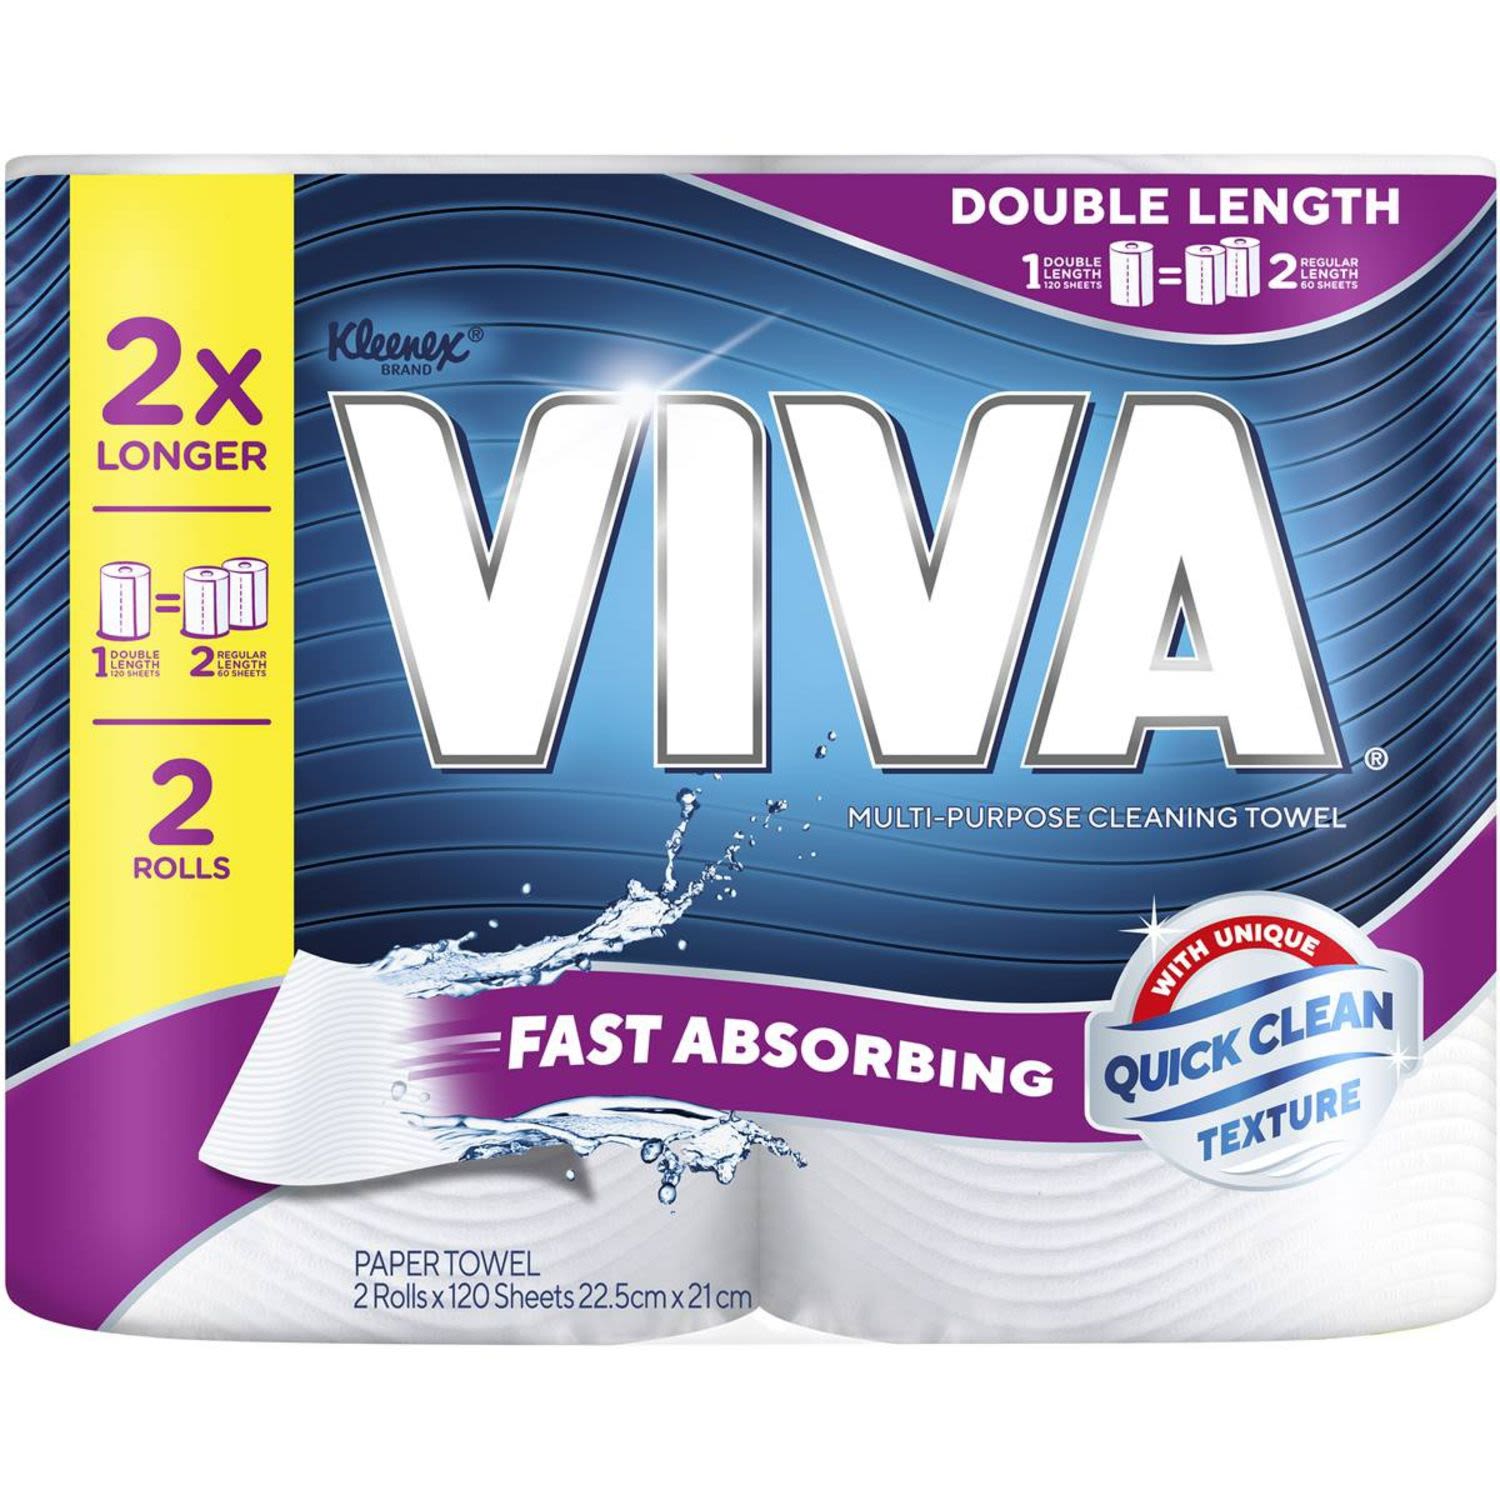 Viva With Bamboo Fibre Paper Towel, Double Length, Multi-Use, 2 Each